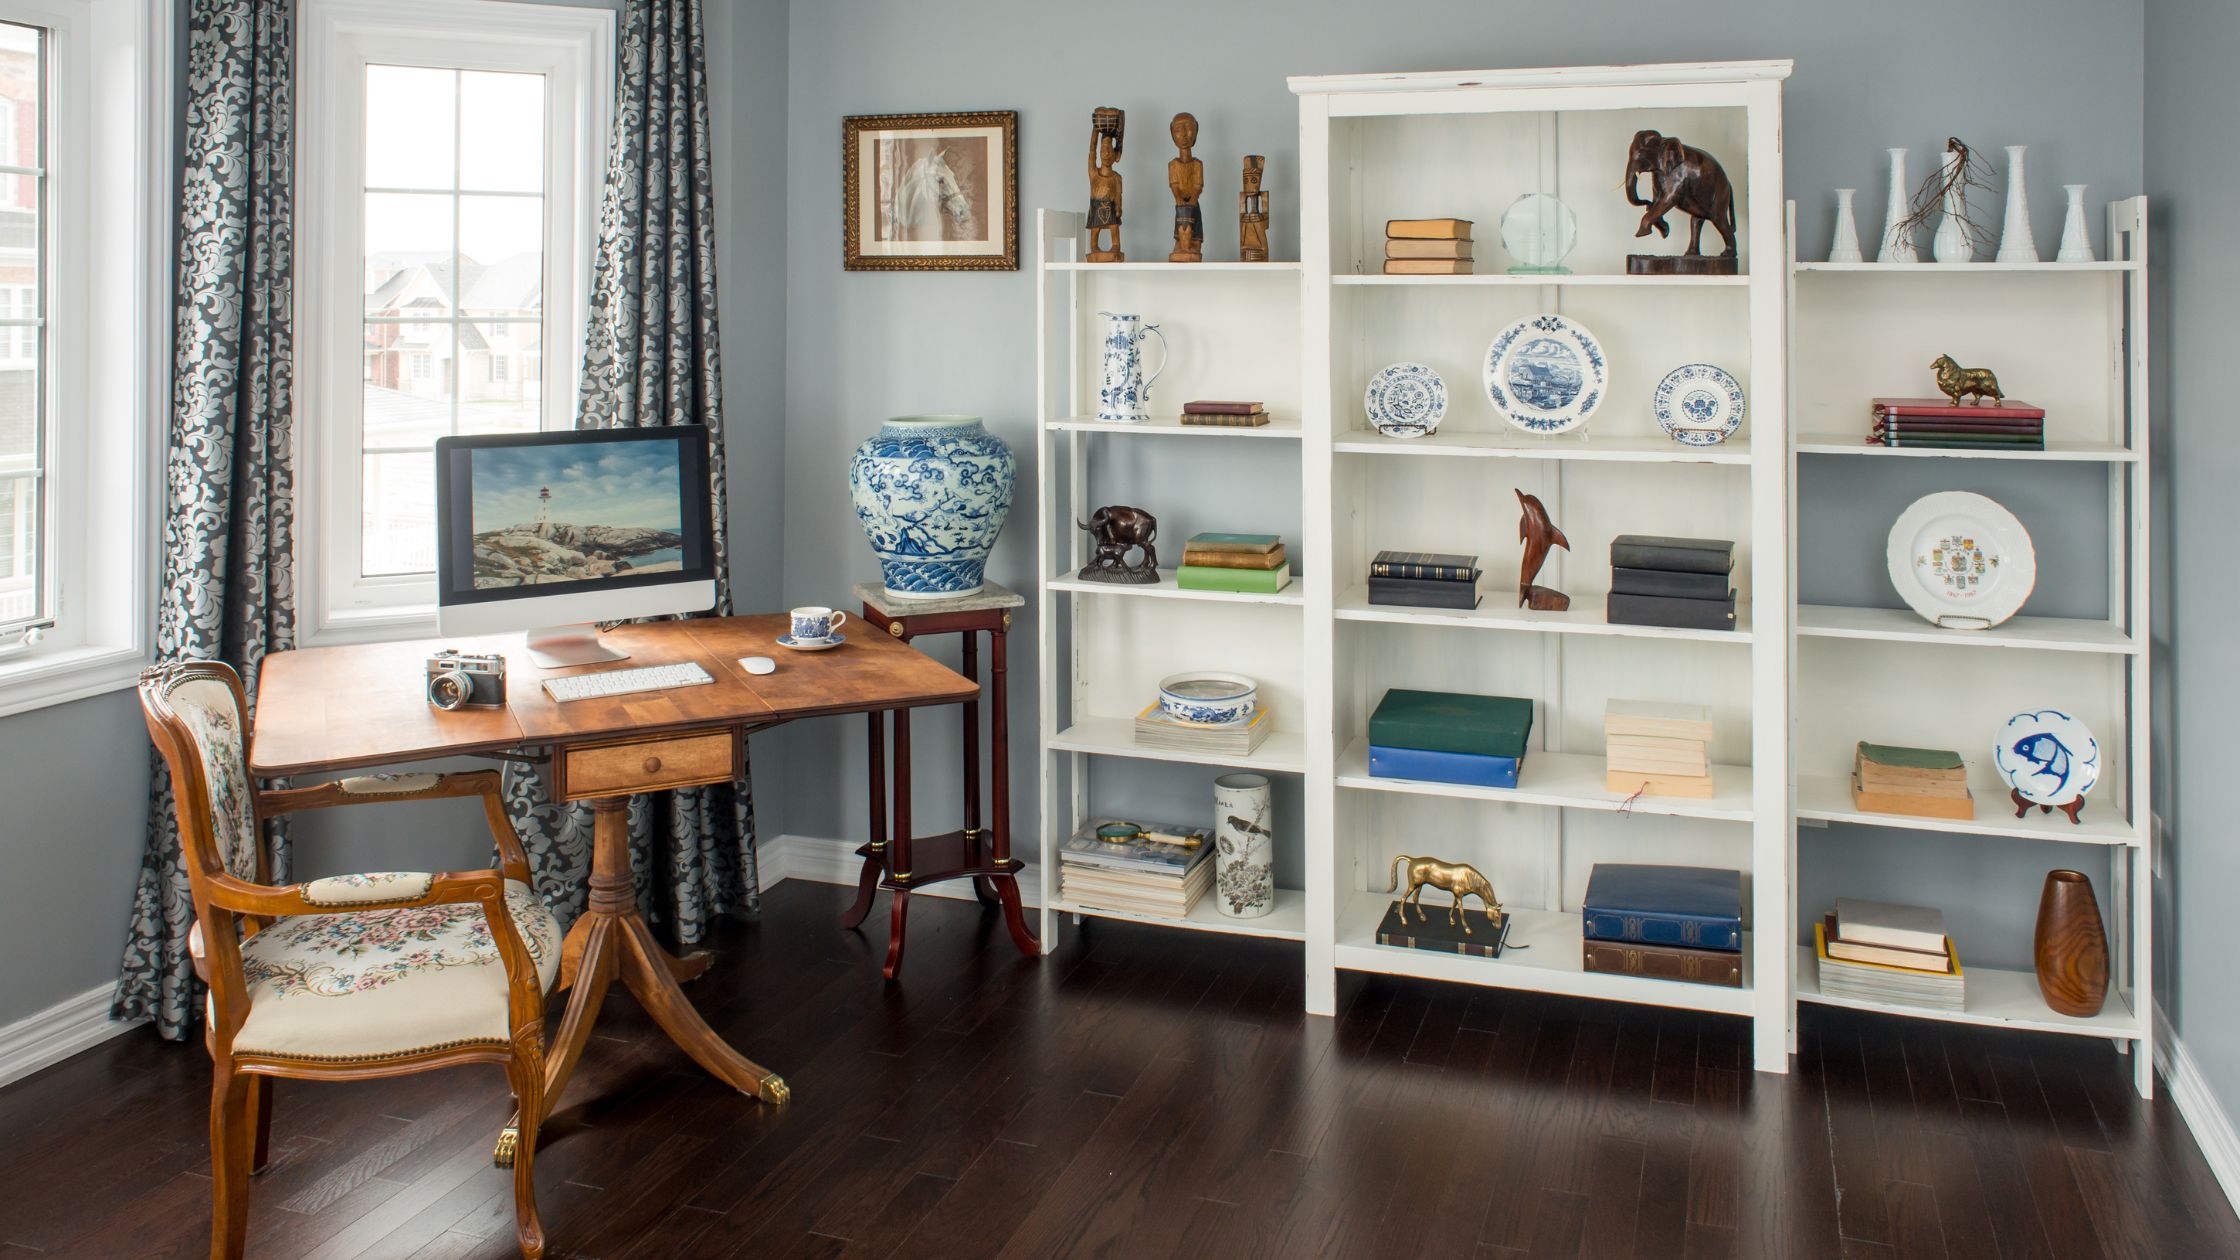 decorate your home office for cheap